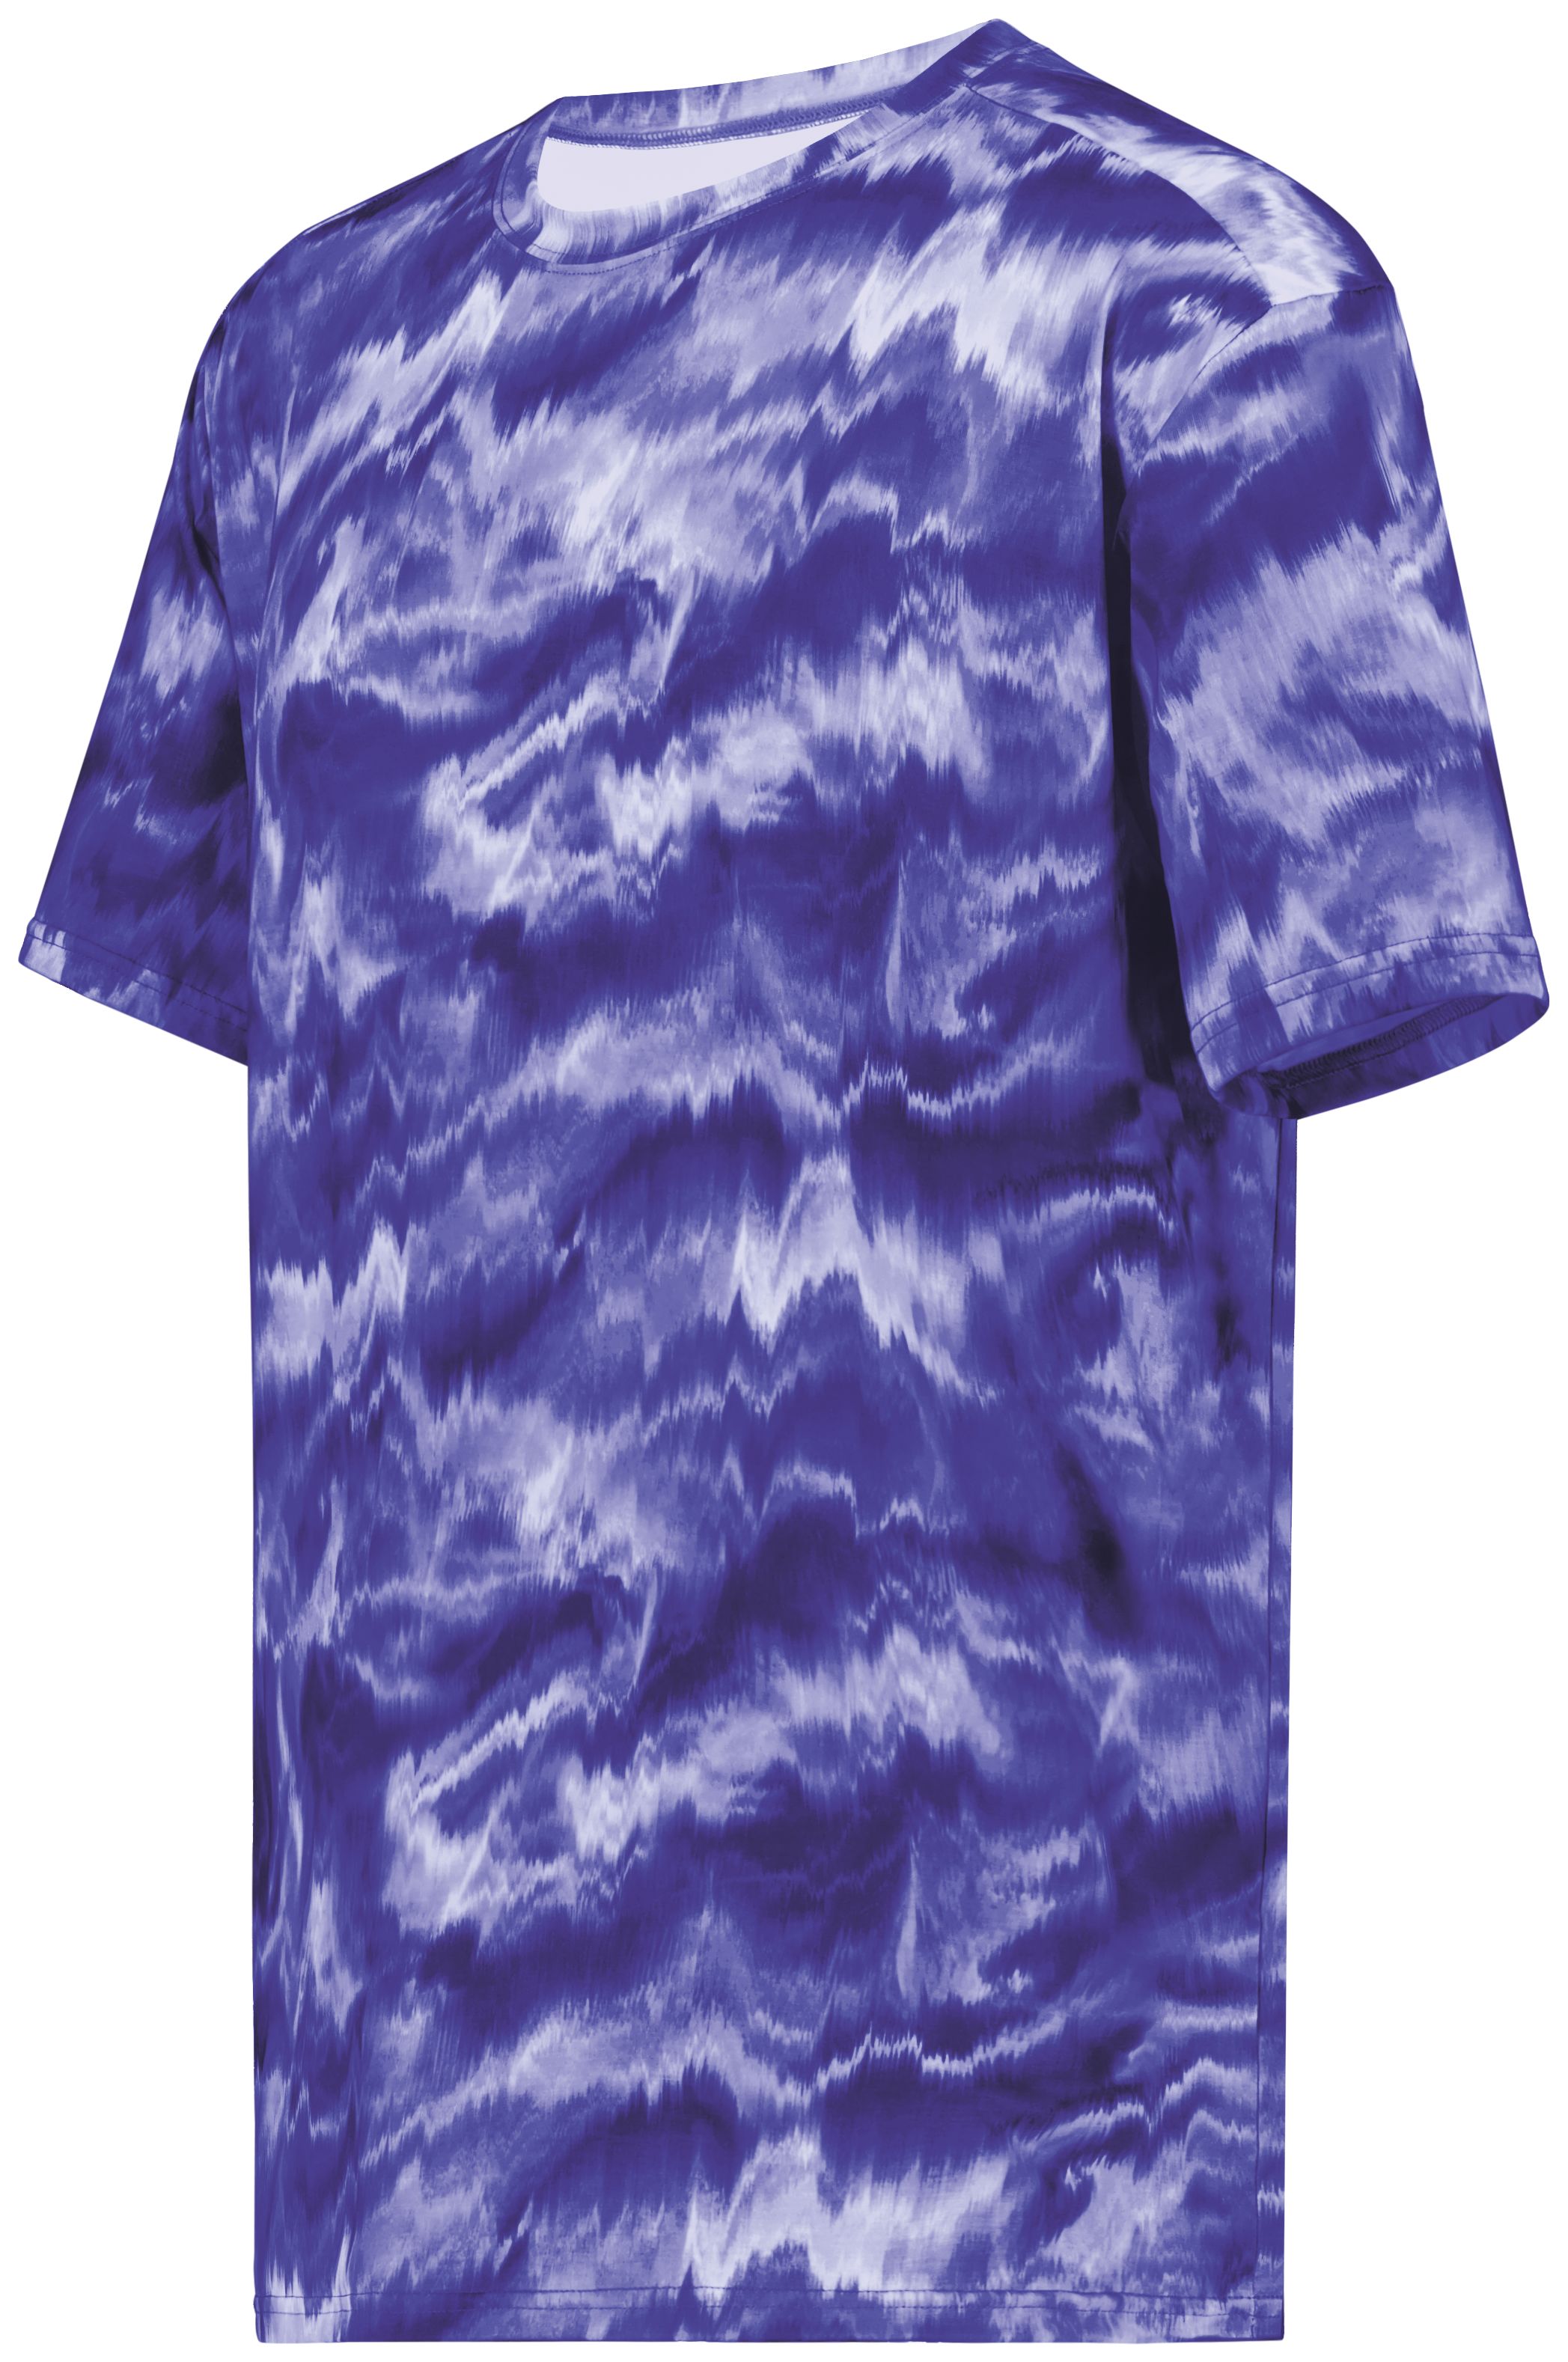 click to view Purple Shockwave Print